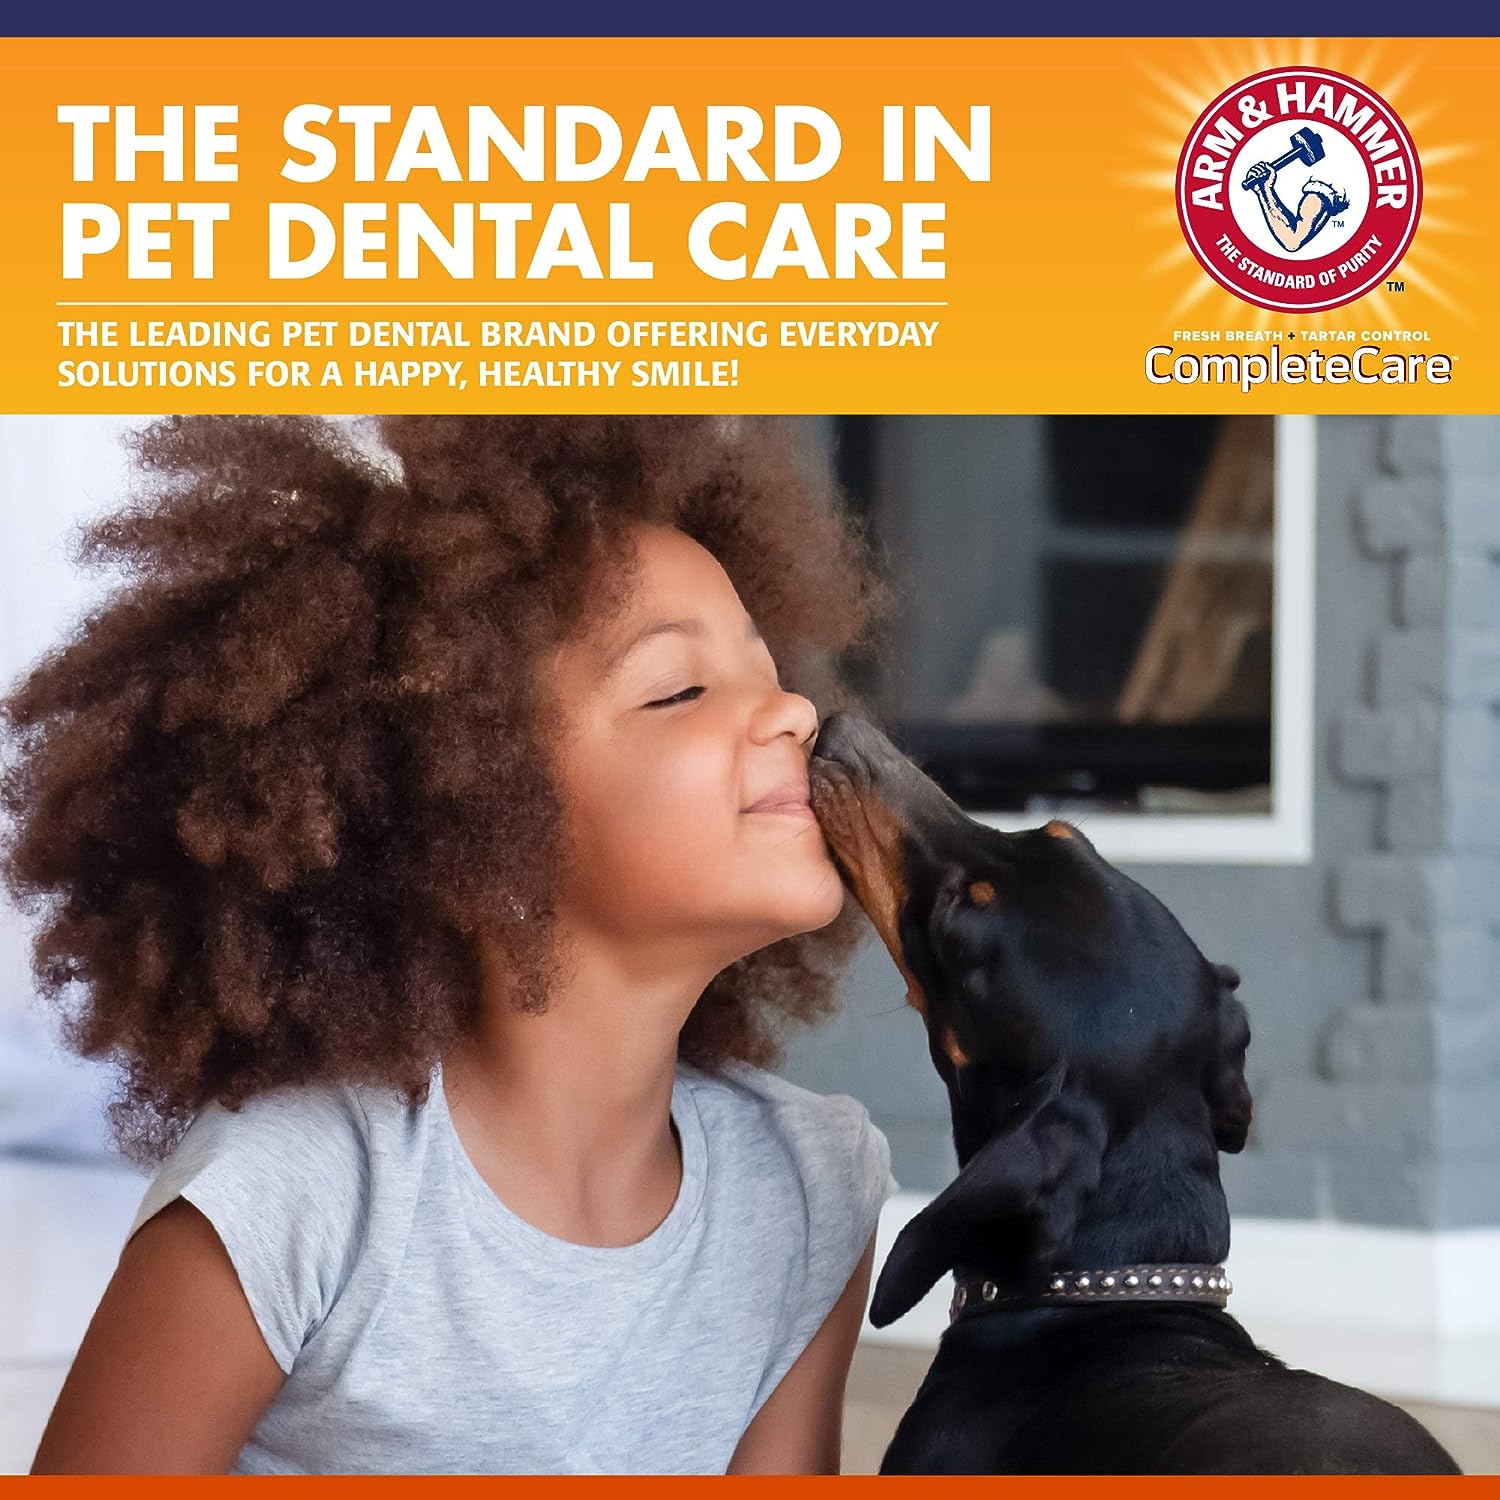 Arm & Hammer Dental Water Additive - Complete Care Fresh, for Dogs and Cats